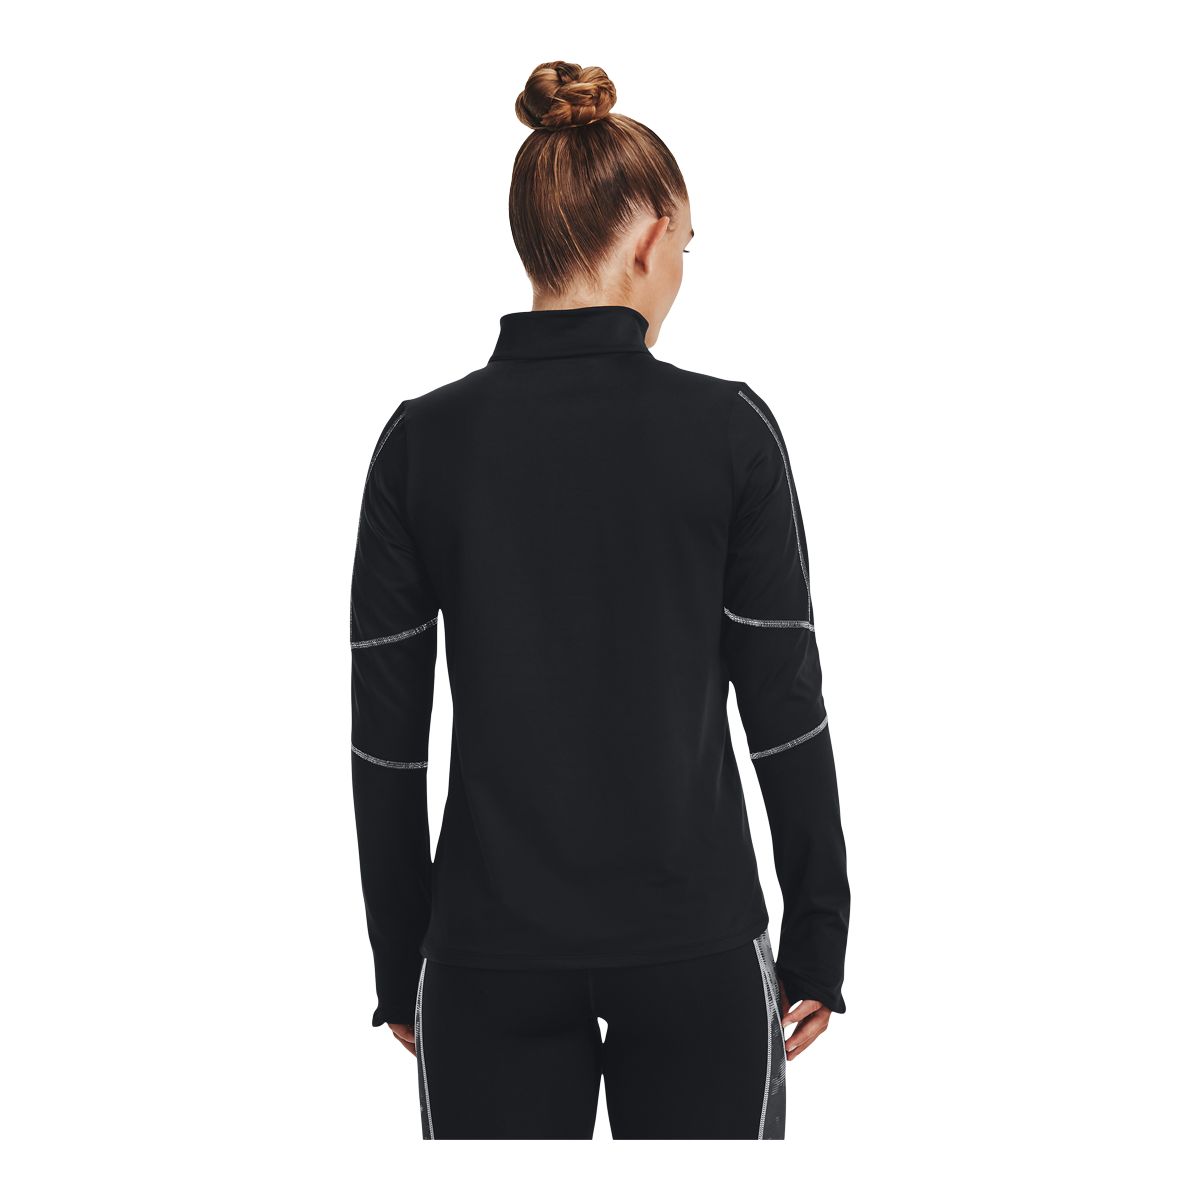 https://media-www.sportchek.ca/product/div-03-softgoods/dpt-70-athletic-clothing/sdpt-02-womens/333820728/under-armour-women-s-cold-train-long-sleeve-half-zip-shirt-2ceafd63-d9d7-41c3-aa58-42a9fe859a0f-jpgrendition.jpg?imdensity=1&imwidth=1244&impolicy=mZoom